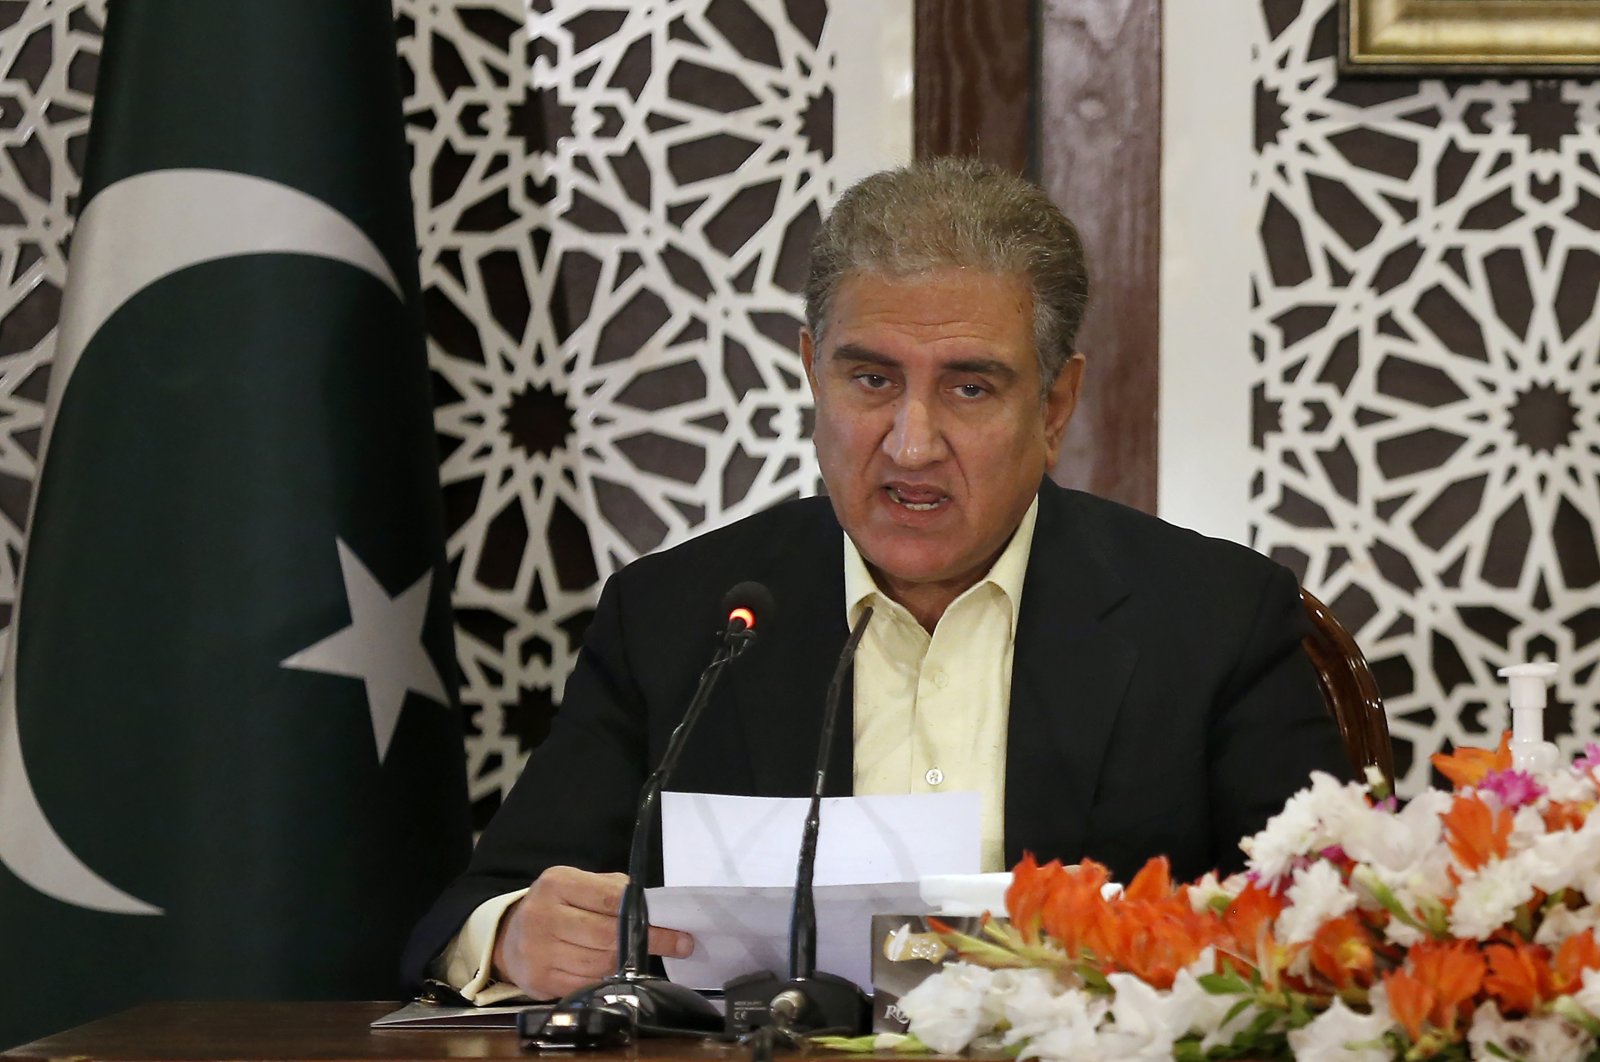 Pakistan's Foreign Minister Shah Mahmood Qureshi briefs media during a press conference, in Islamabad, Pakistan on Nov. 14, 2020. (AP Photo)